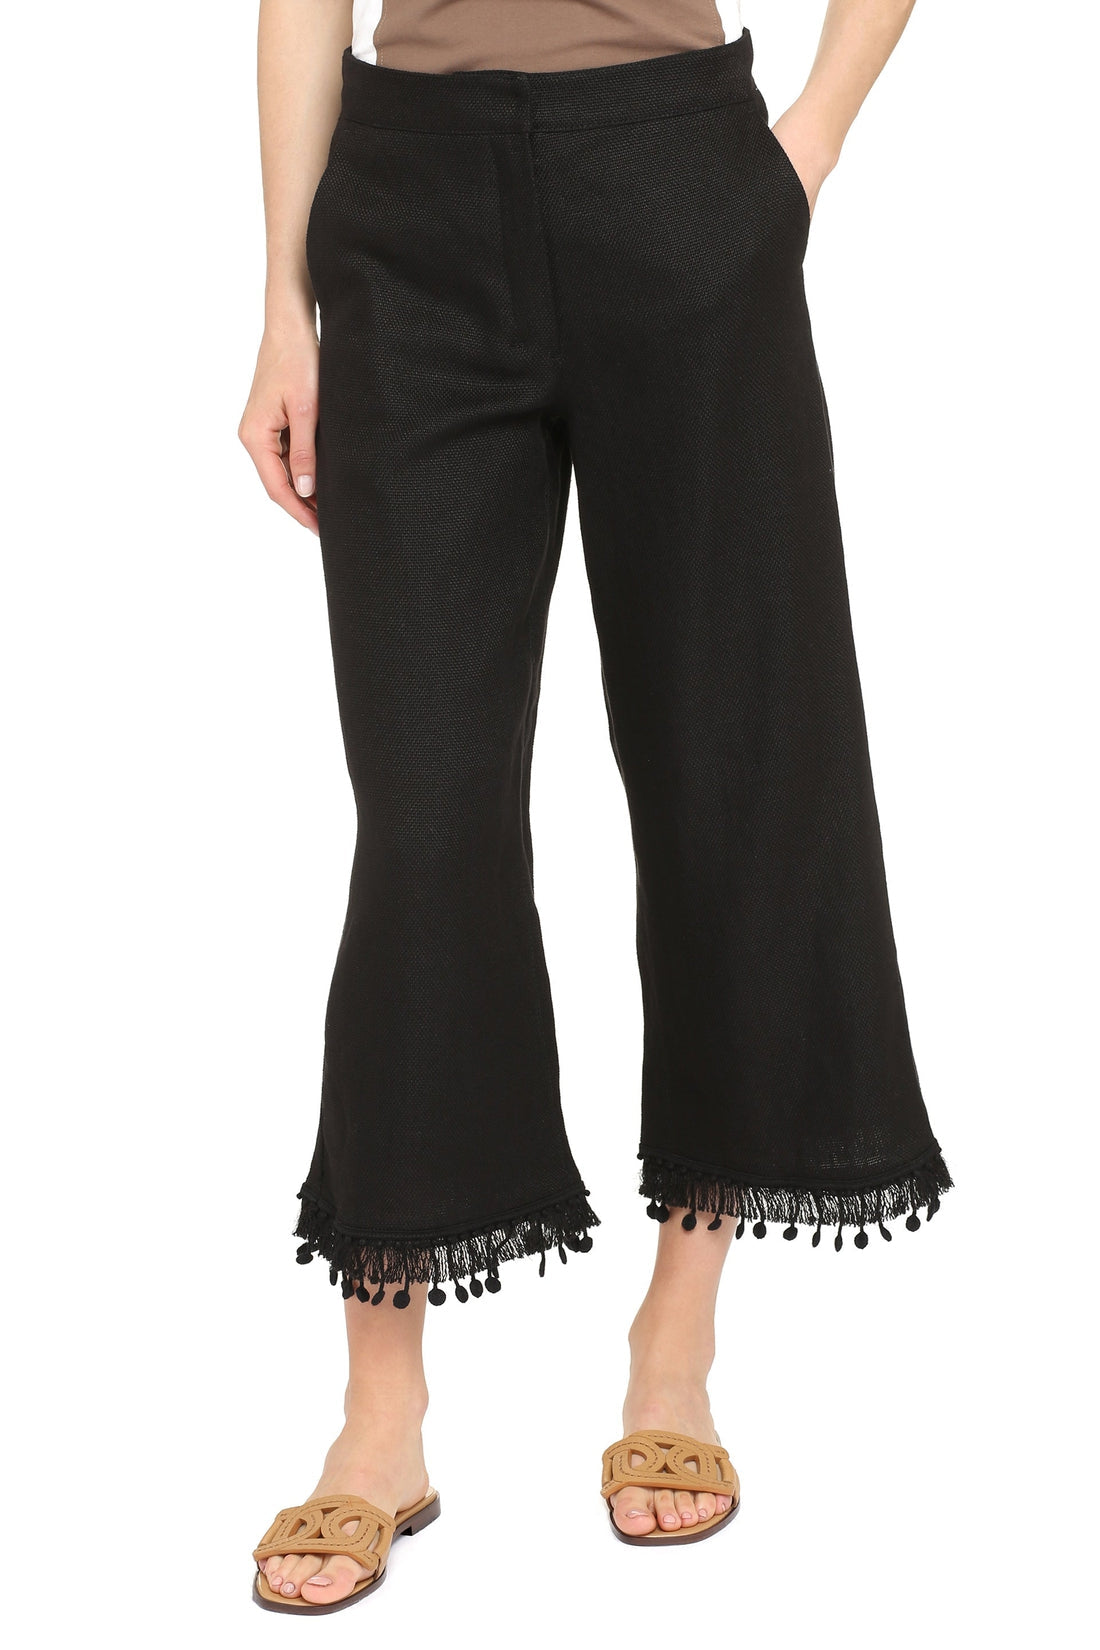 S MAX MARA-OUTLET-SALE-Fiaba linen and cotton trousers-ARCHIVIST